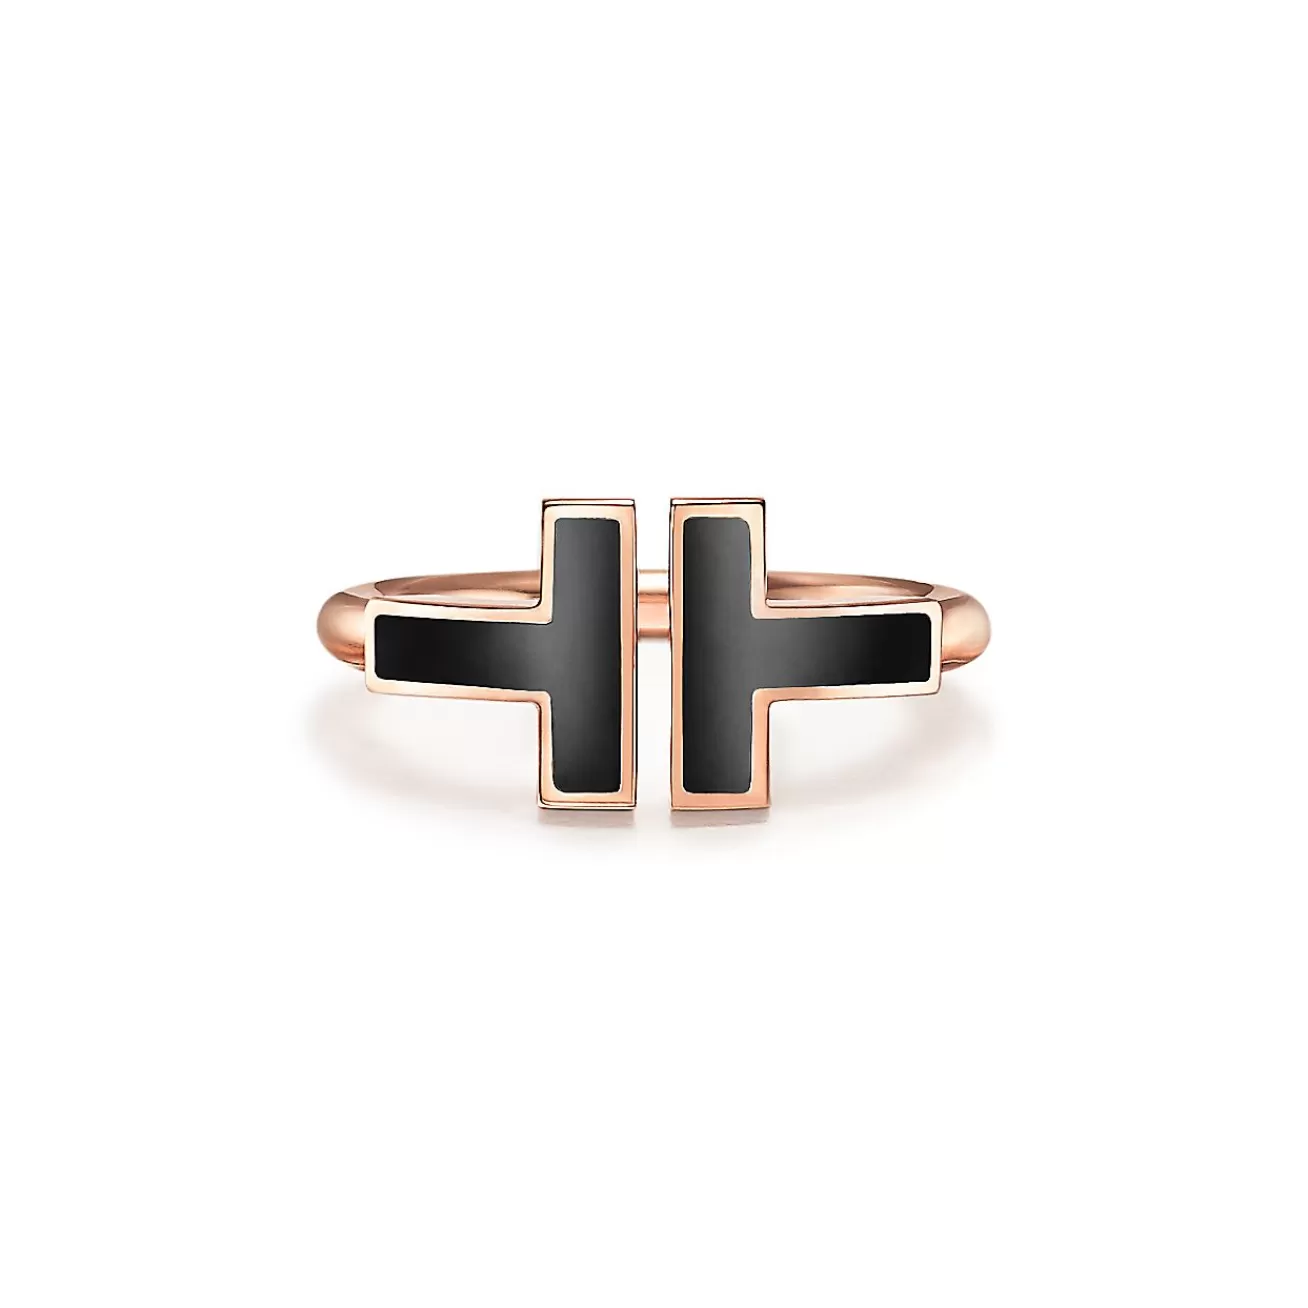 Tiffany & Co. Tiffany T black onyx wire ring in 18k rose gold. | ^ Rings | Rose Gold Jewelry